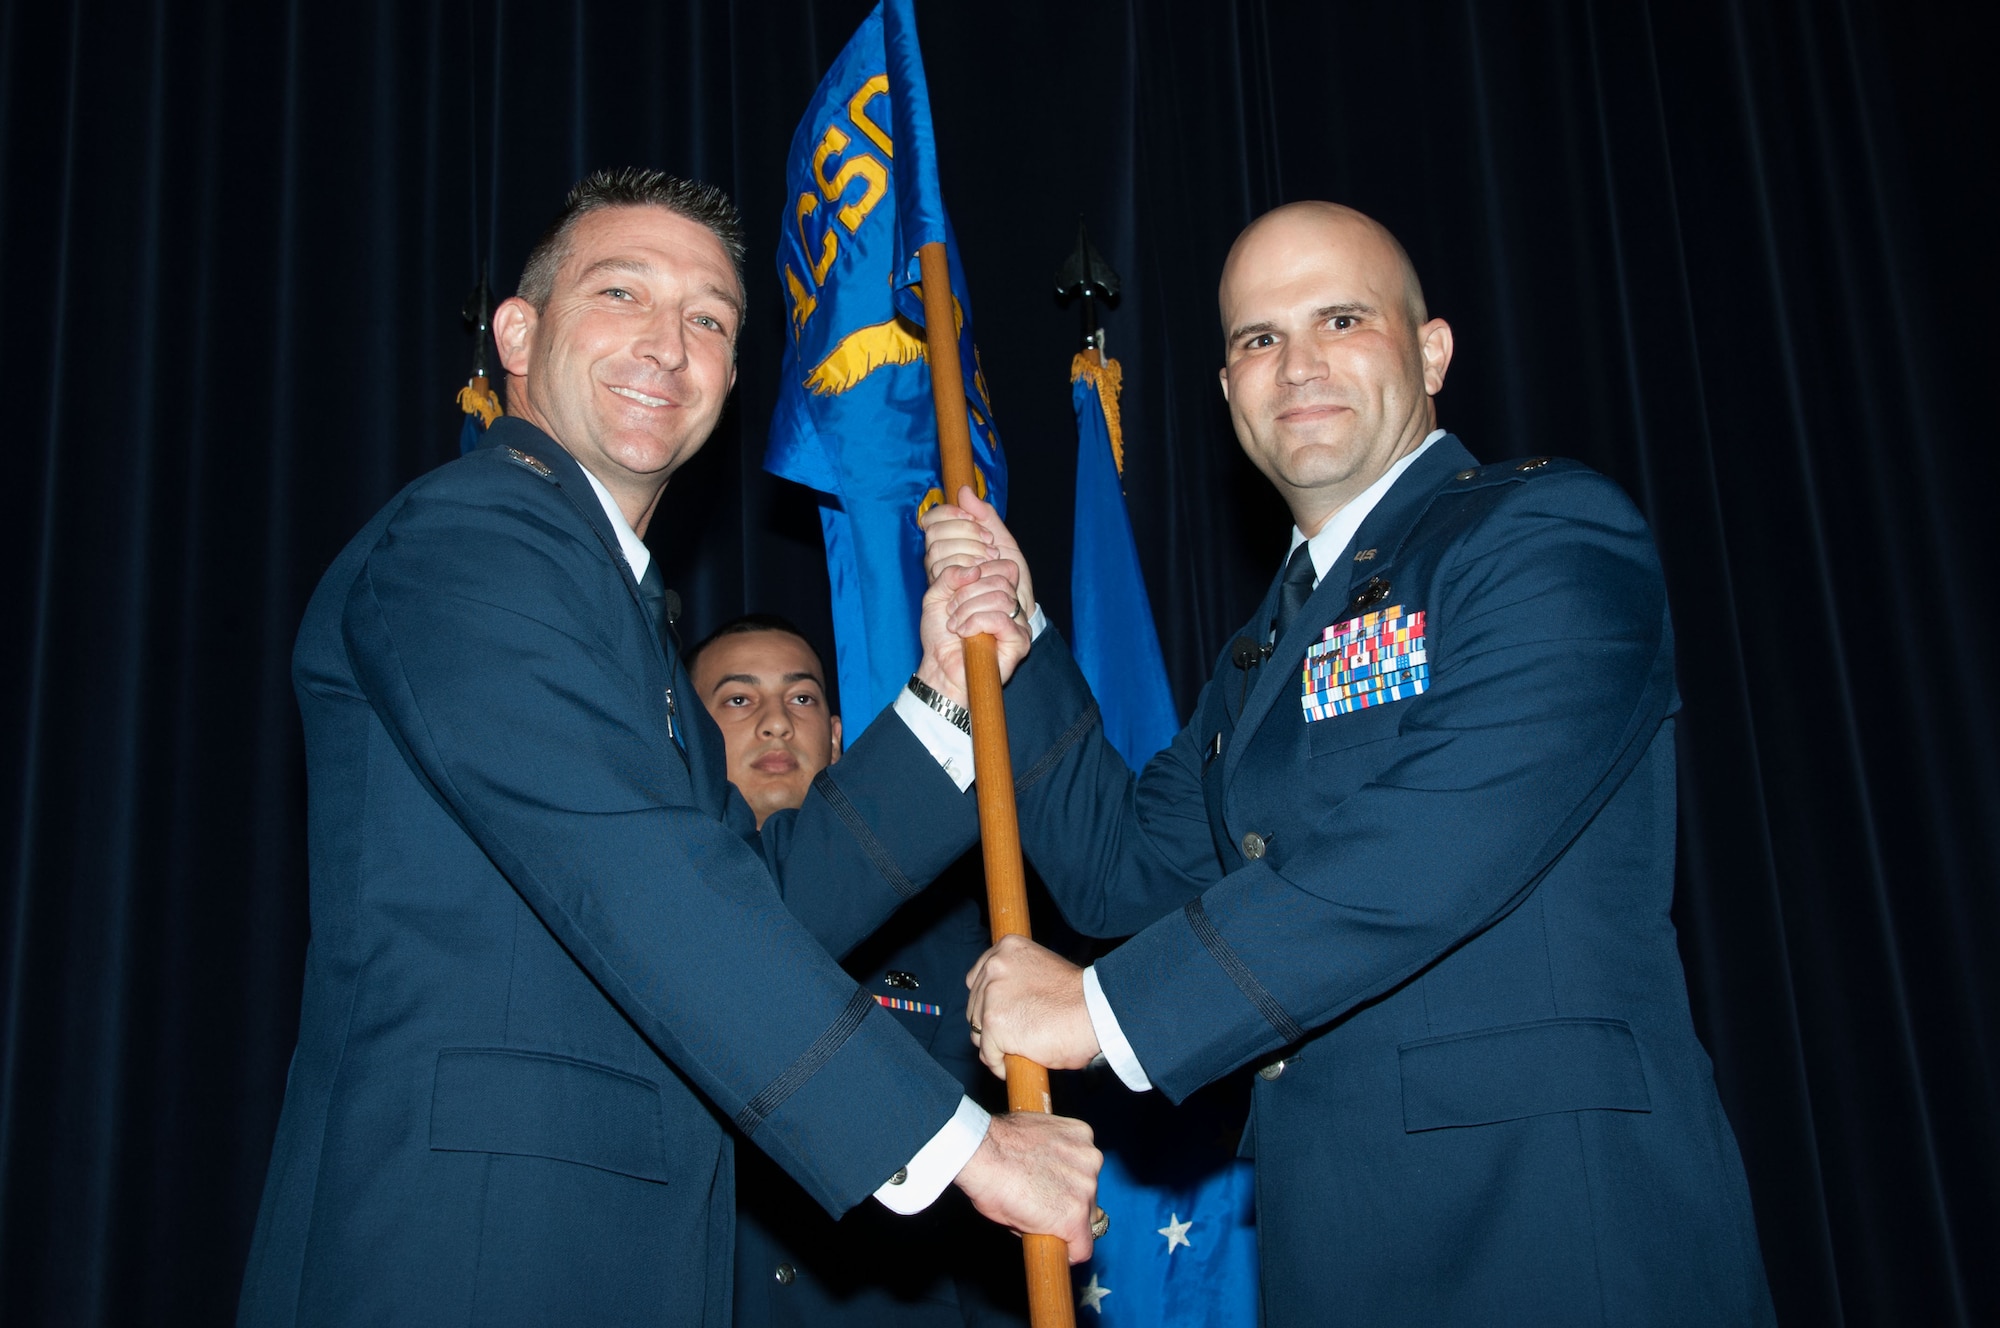 Col. Brian Hastings, Air Command and Staff College commandant hands over command of the 38th Student Squadron to Lt. Col. Richard Major during the ACSC 38th STUS Activation and Assumption of Command ceremony November 2, 2015, at Maxwell Air Force Base, Alabama. The 38th STUS was re-activated for a fourth time in 43 years to better support over 500 ACSC students. (U.S. Air Force photo by Bud Hancock)